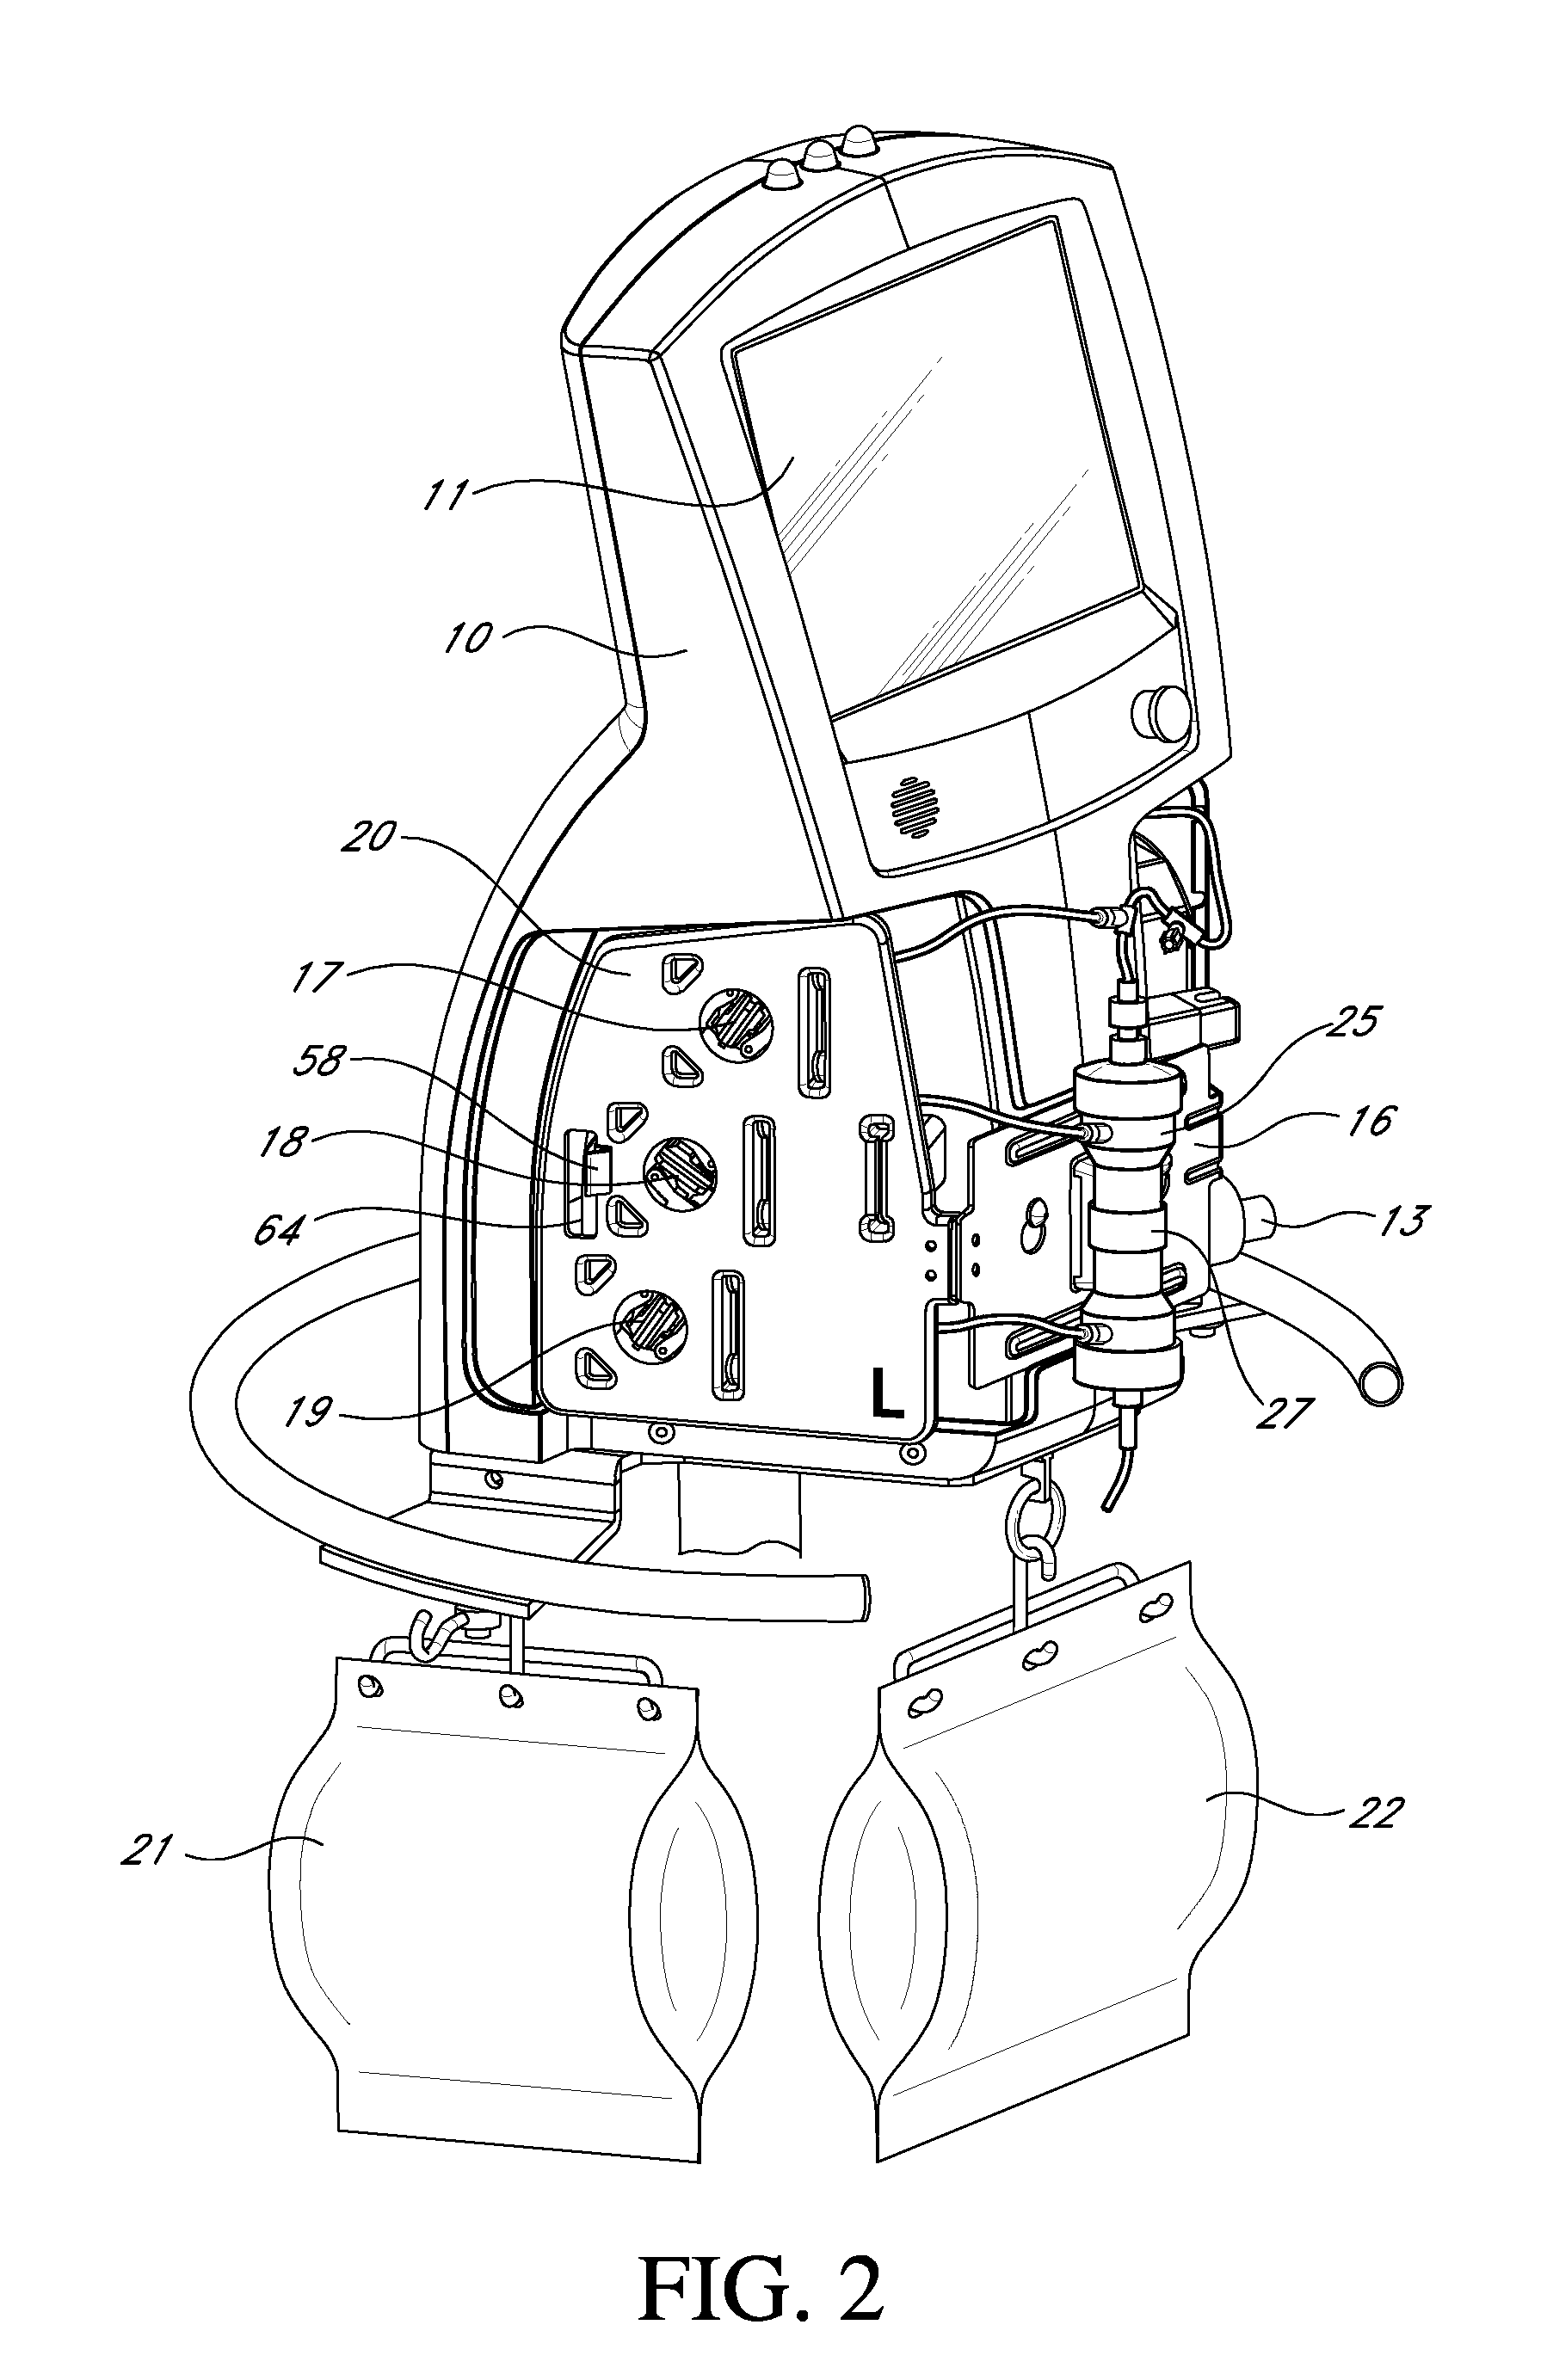 Modular hemofiltration apparatus with interactive operator instructions and control system